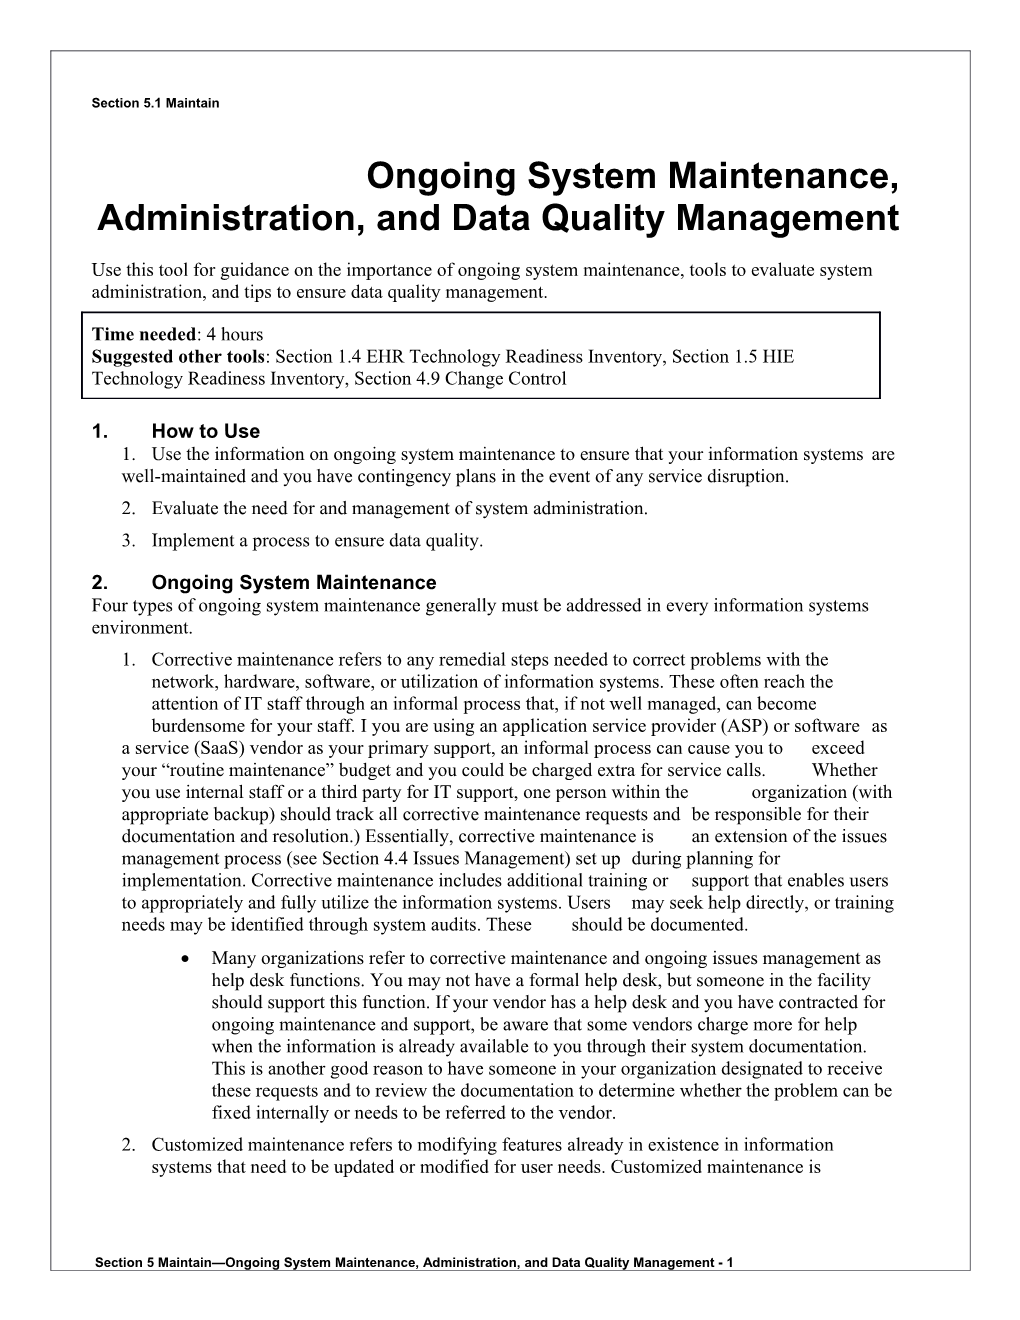 5 Ongoing System Maintenance, Administration, and Data Quality Management